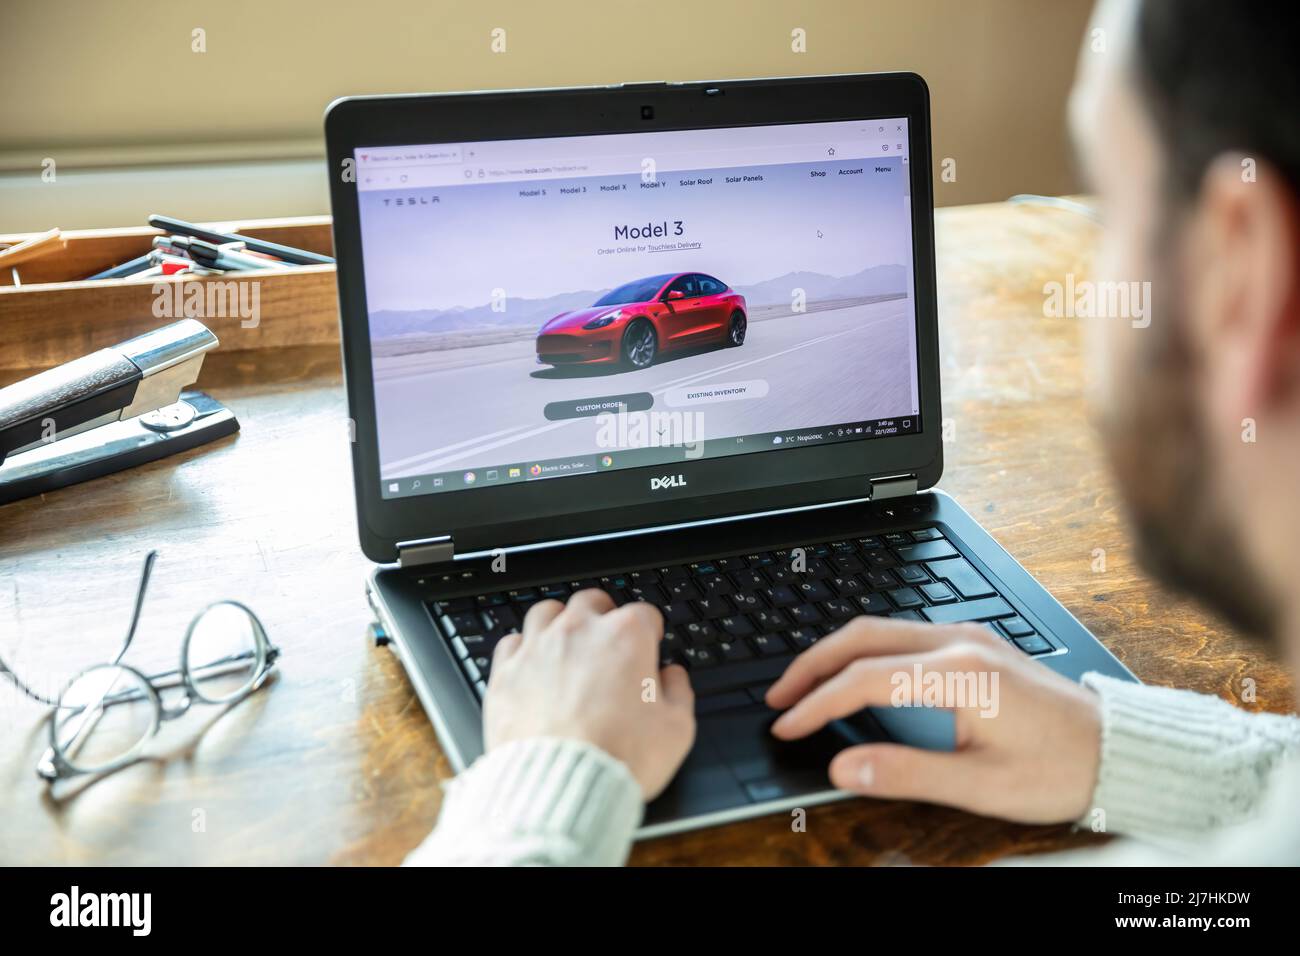 Greece, Athens, January 23 2022. TESLA CAR SELECTION. Ad, online red Tesla model 3 electric auto. Pc on table, hand on keyboard Stock Photo